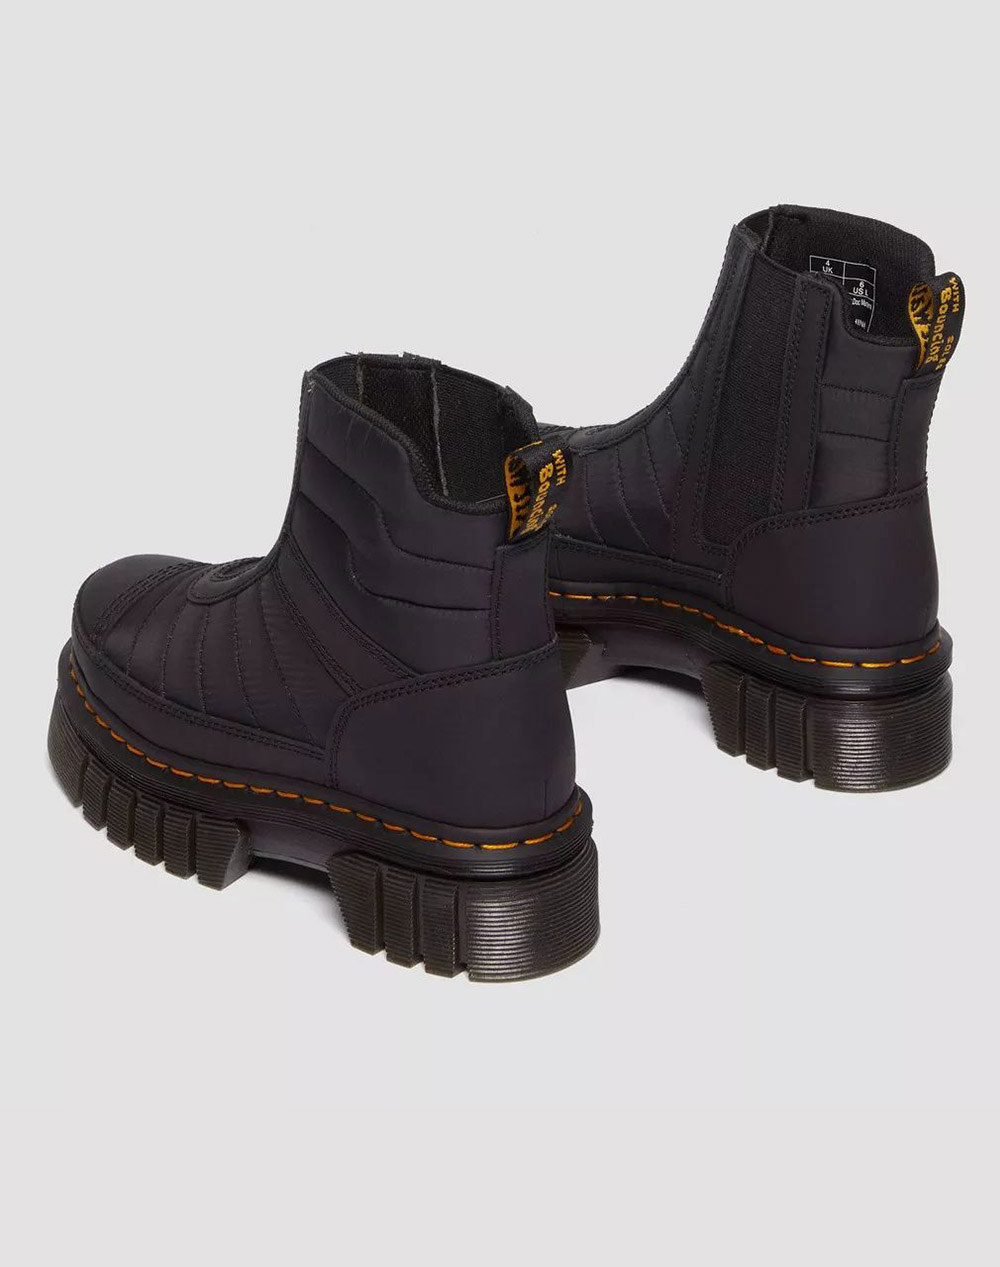 DR.MARTENS 30915001 Audrick Chelsea QLTD Rubberised Leather & Warm Quilted DR MARTENS LOW BOOTS